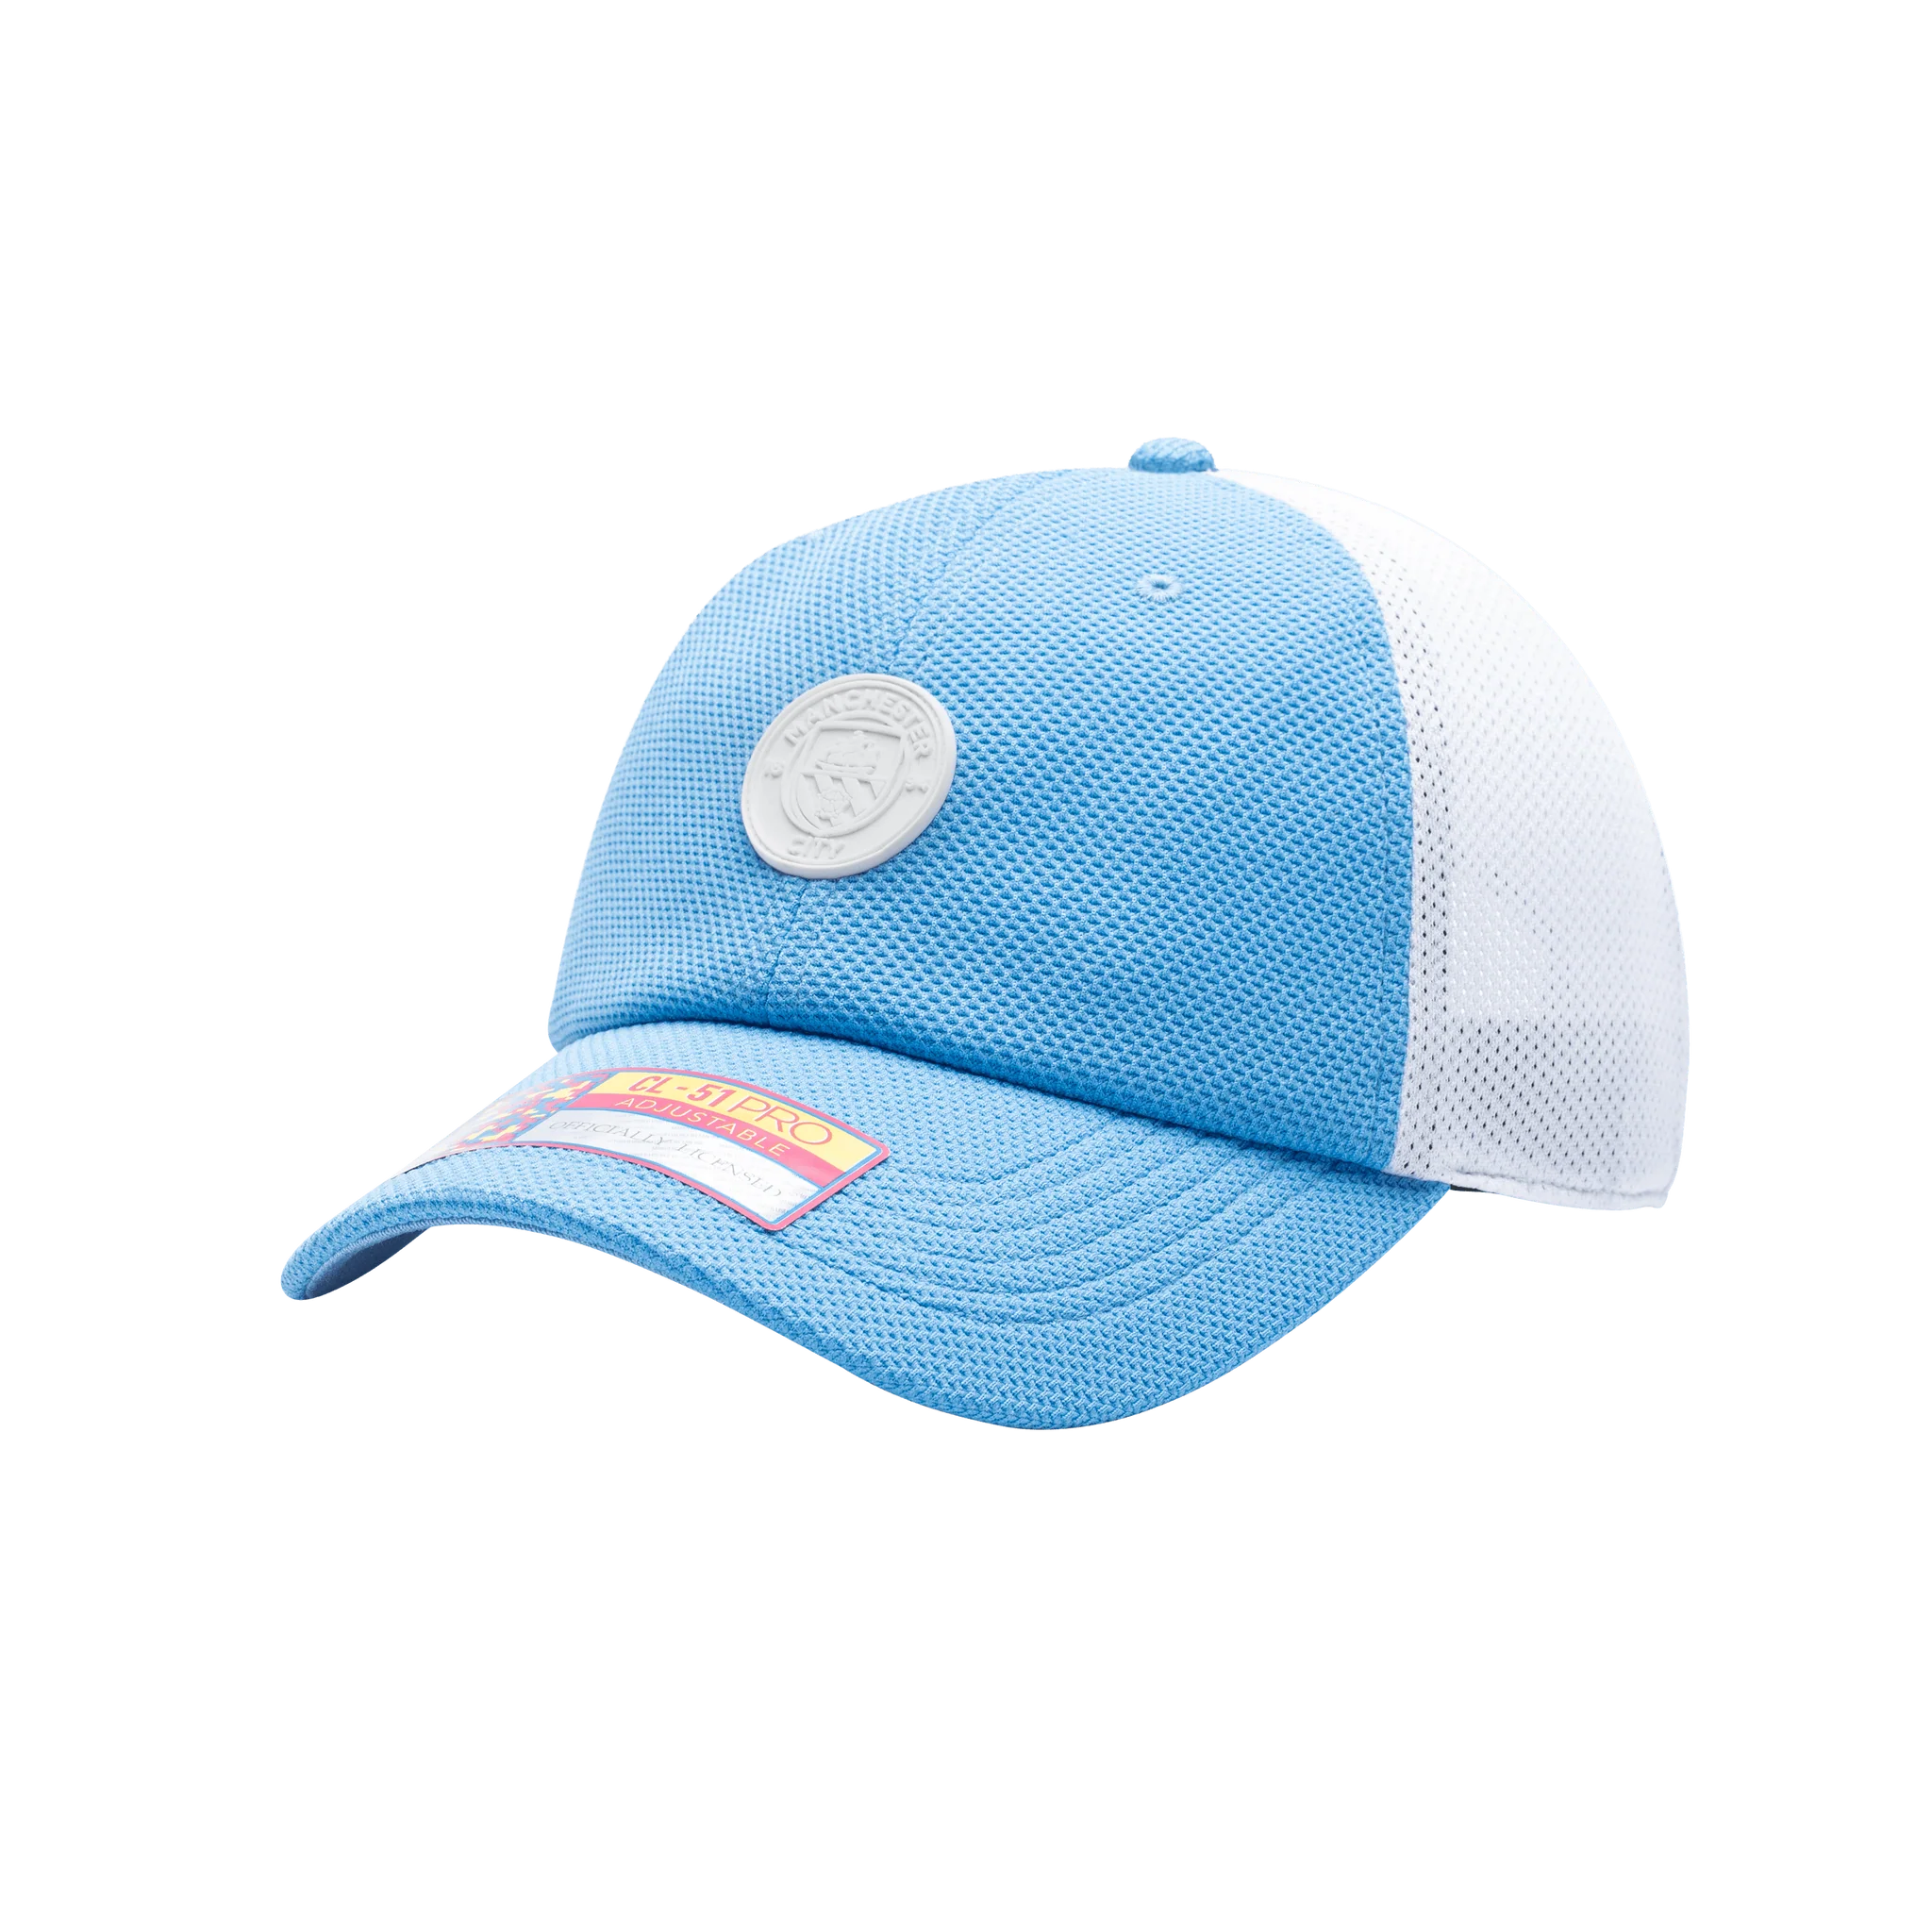 Fan Ink Manchester City Ace Classic Hat